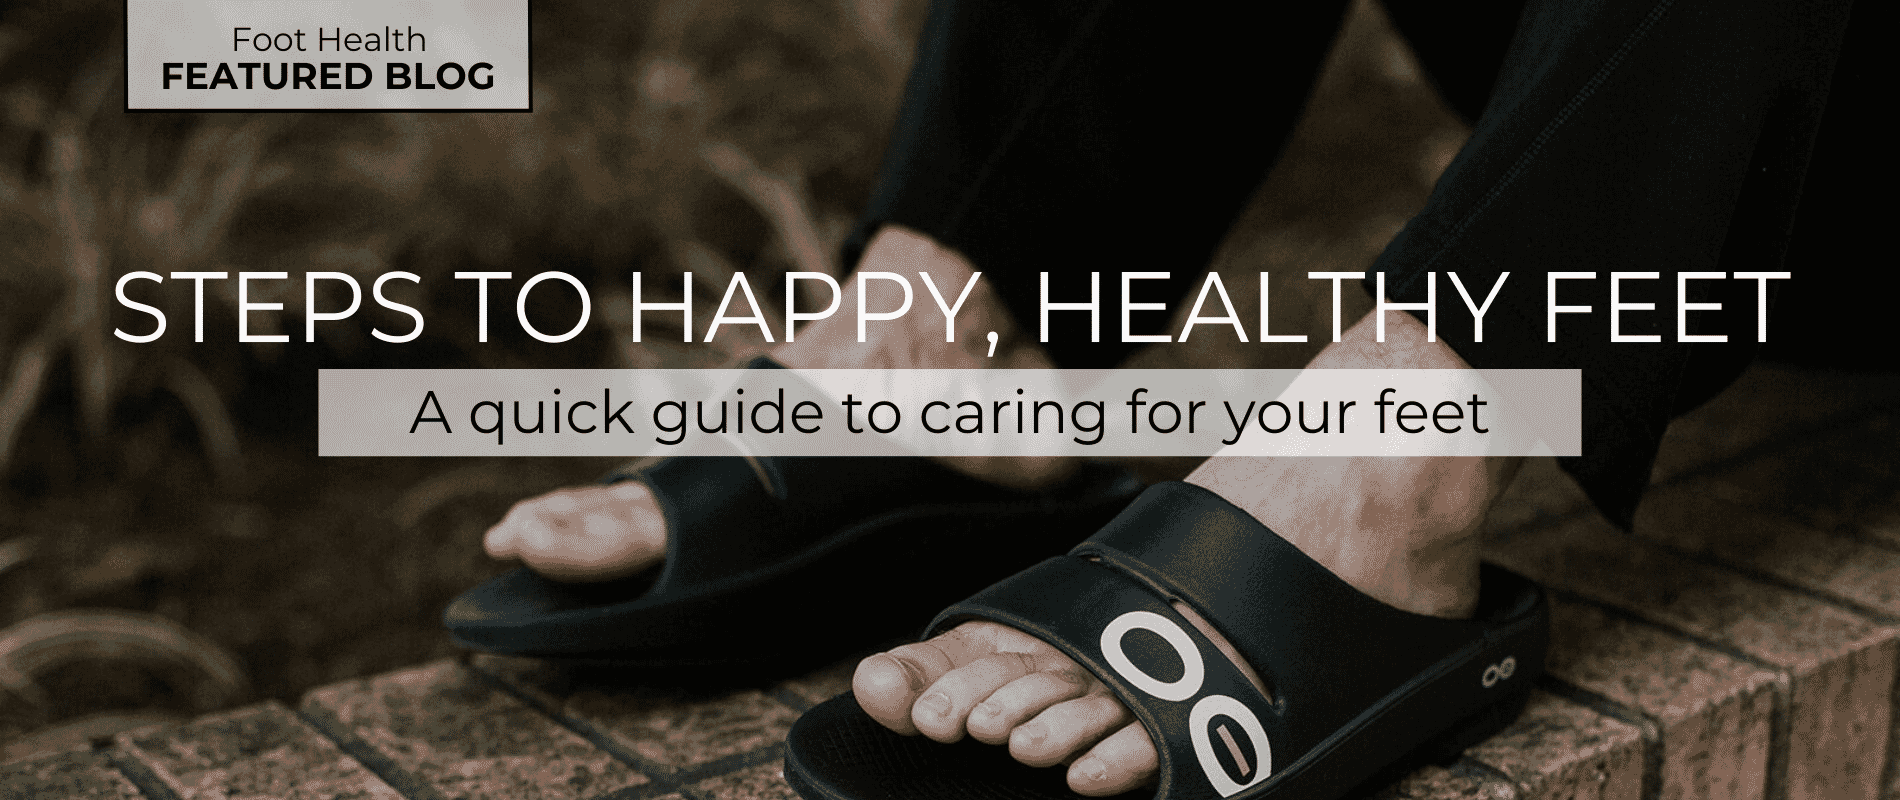 Steps to happy, healthy feet: a quick guide to caring for your feet from Elliott's Boots and Shoes!